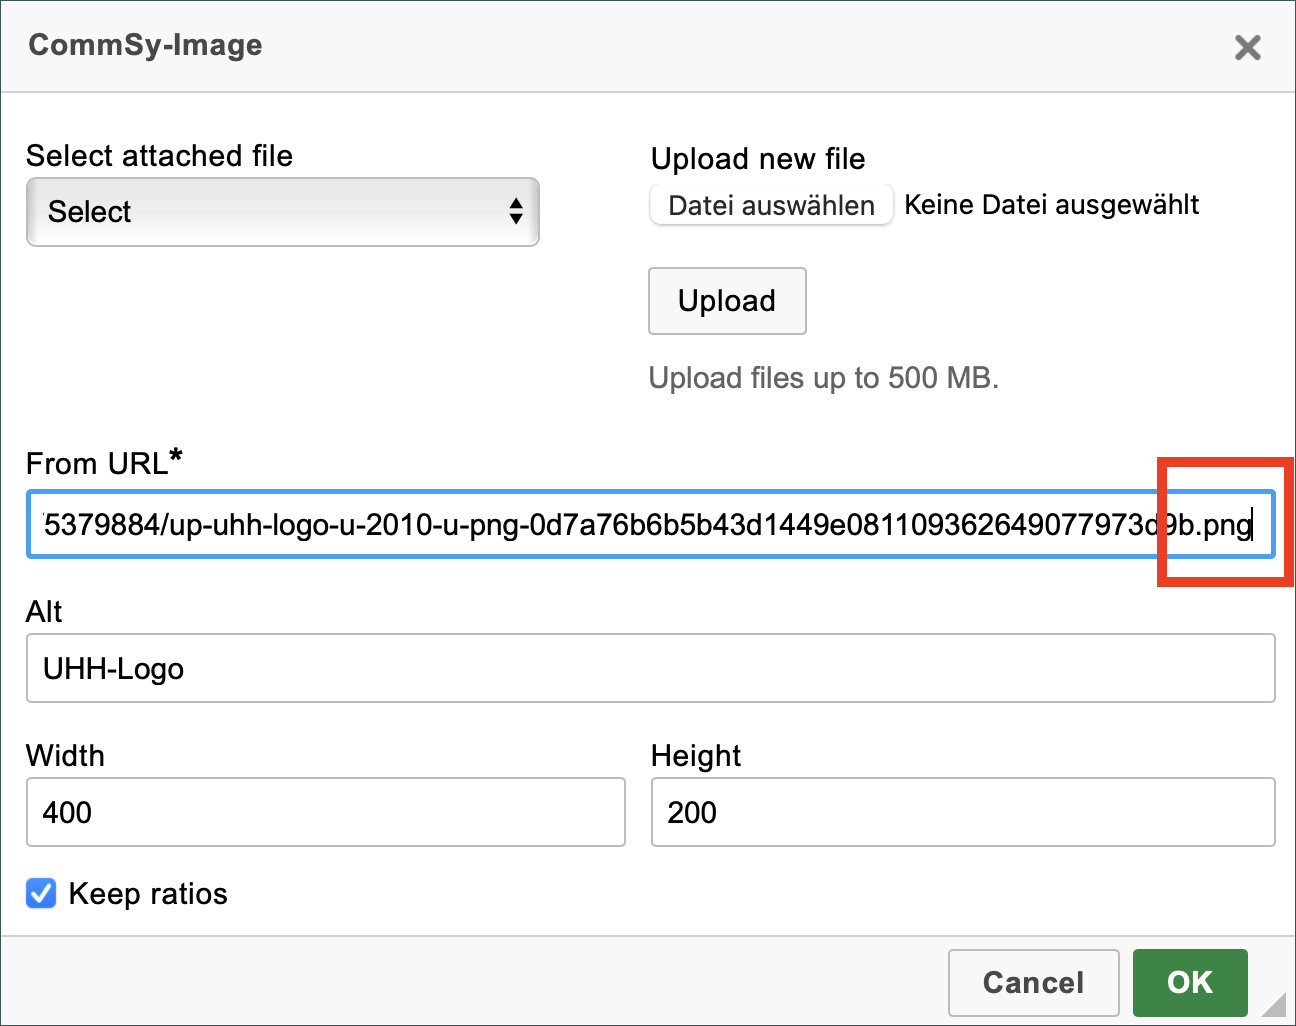 Screenshot: inserting an URL for the inserted image on the CommSy-image form